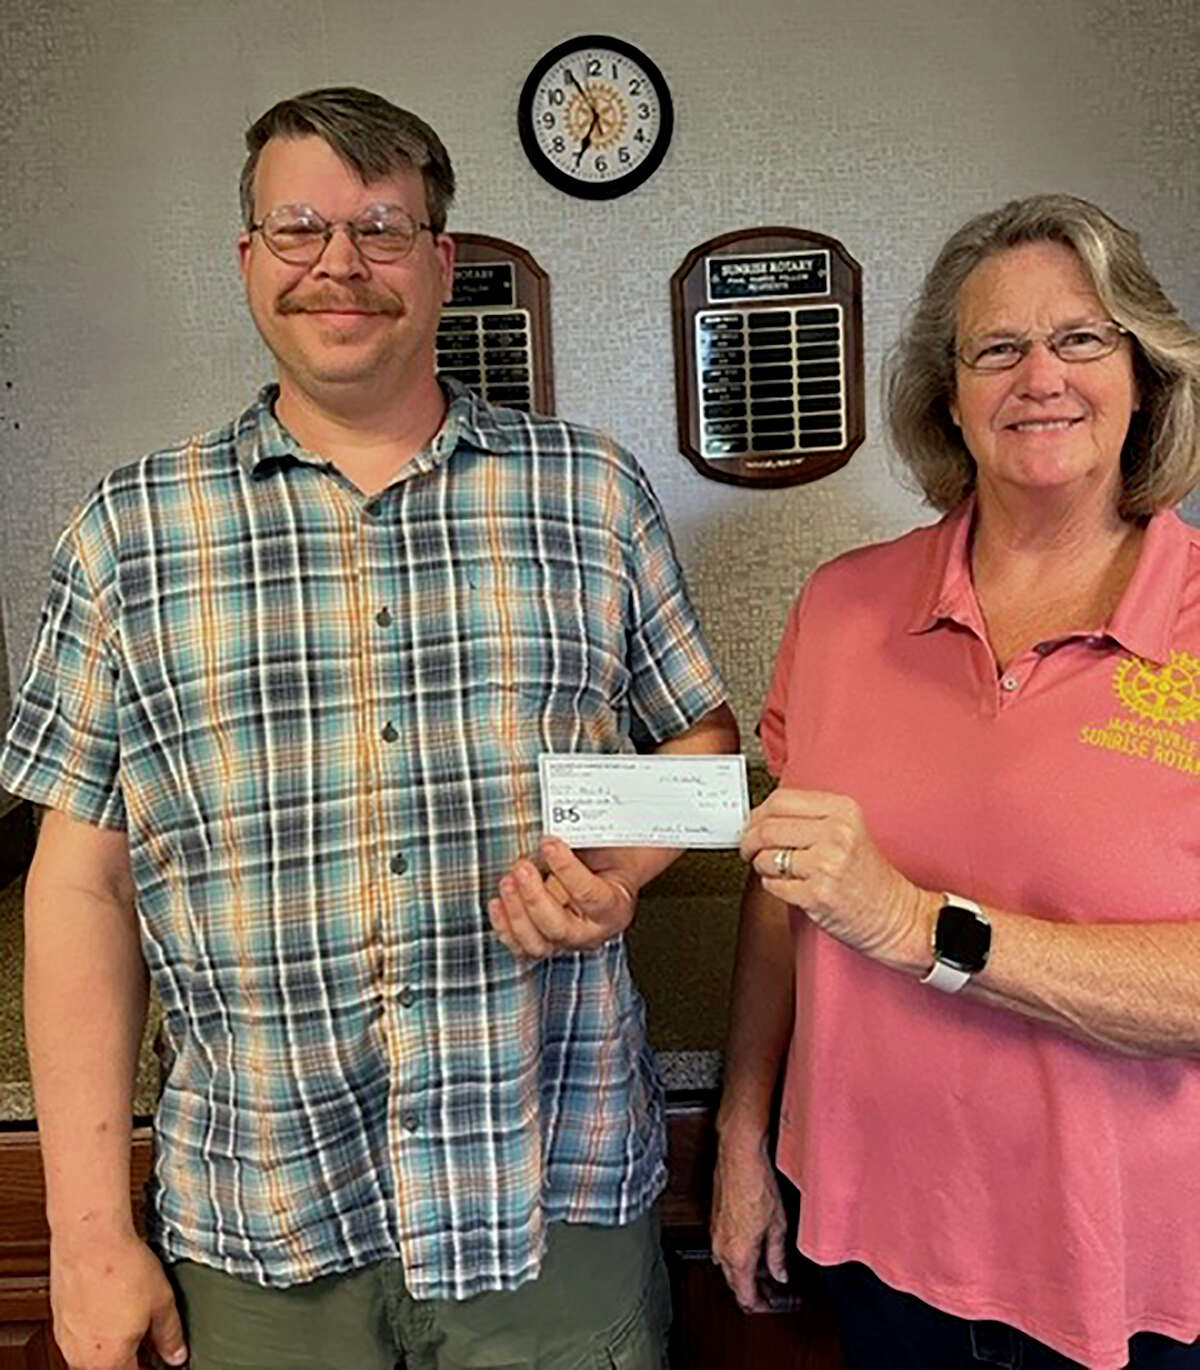 Jane Becker, president of Jacksonville Sunrise Rotary Club, presents a $100 check to Chad Boehlke, coordinator for the 2022 Prairieland Chautauqua. The funds donated by the club are to benefit the Chautauqua, which will be Sept. 2-3 — Labor Day weekend — at the Nichols Park pavilion. Admission is free and open to the public.